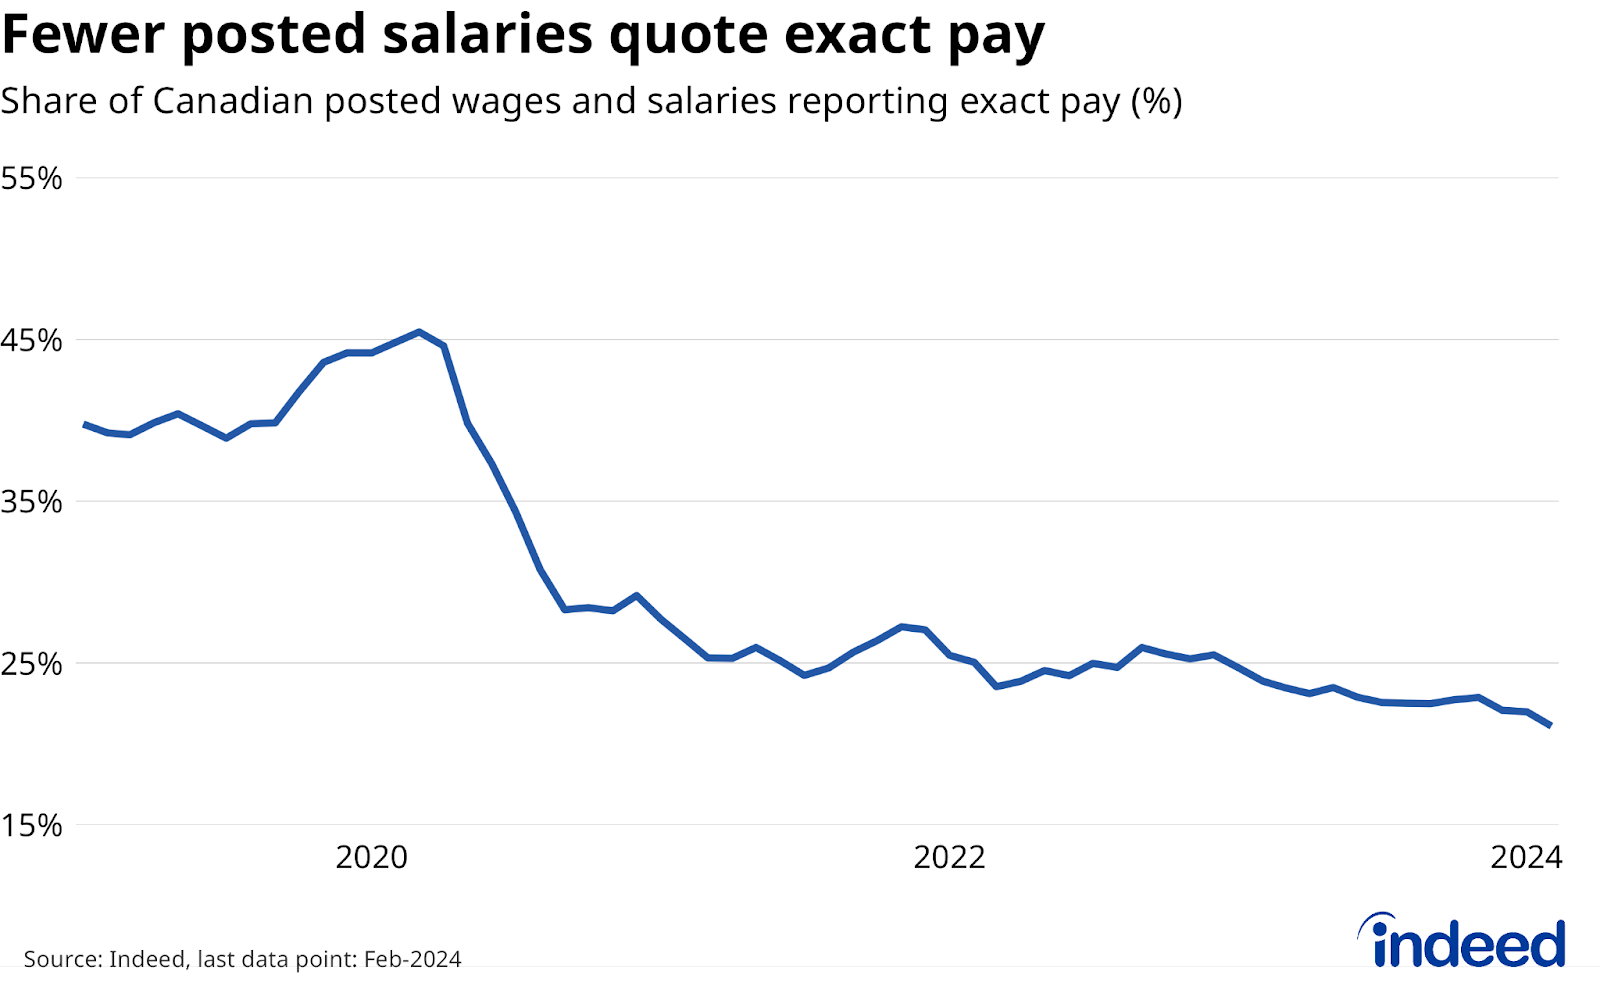 Line chart titled “Fewer posted salaries quote exact pay” shows the share of posted salaries on Canadian job postings that quote exact pay levels between January 2019 and February 2024. Over this period, the share reporting exact pay fell from 40% to 21%. 